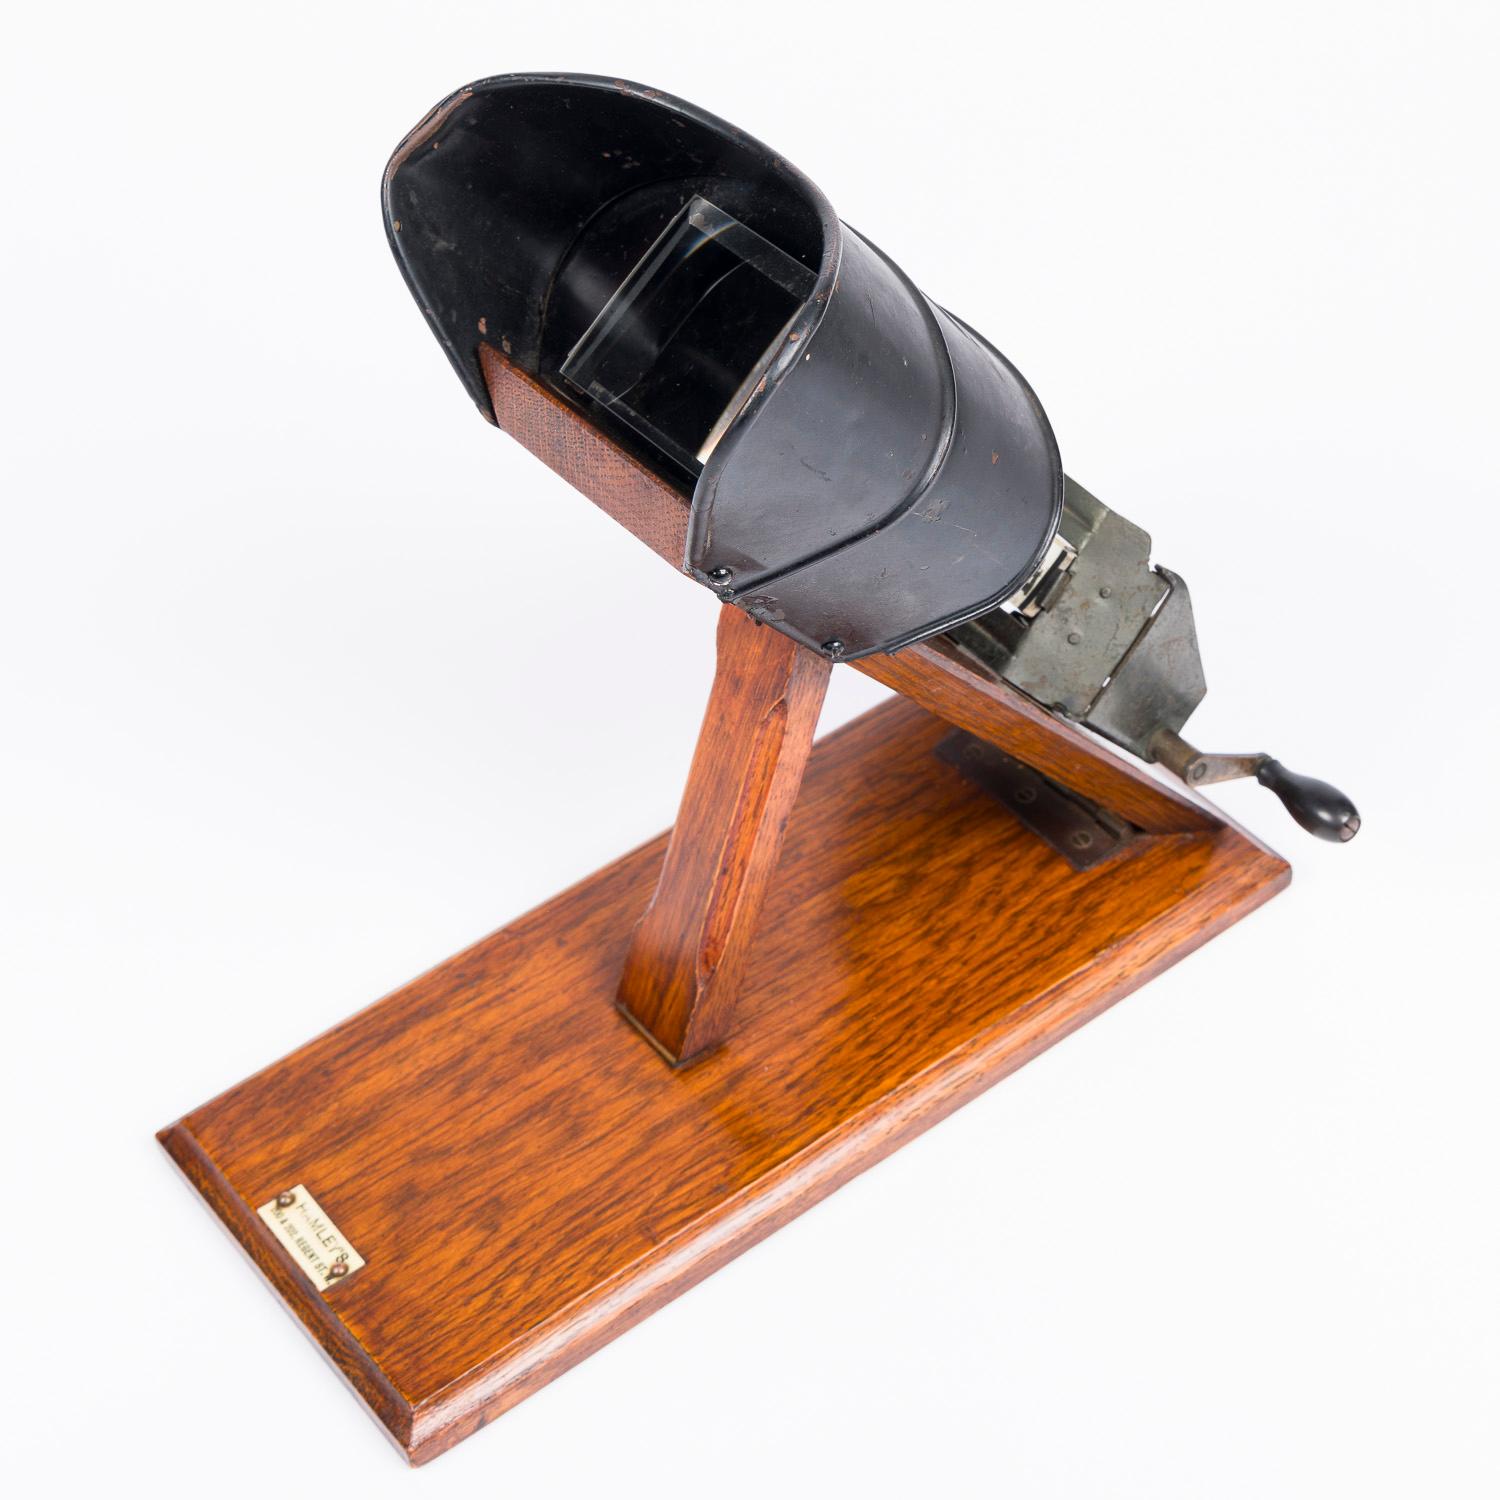 Optical Glass Kinora monochrome motion picture viewer, circa 1905. For Sale